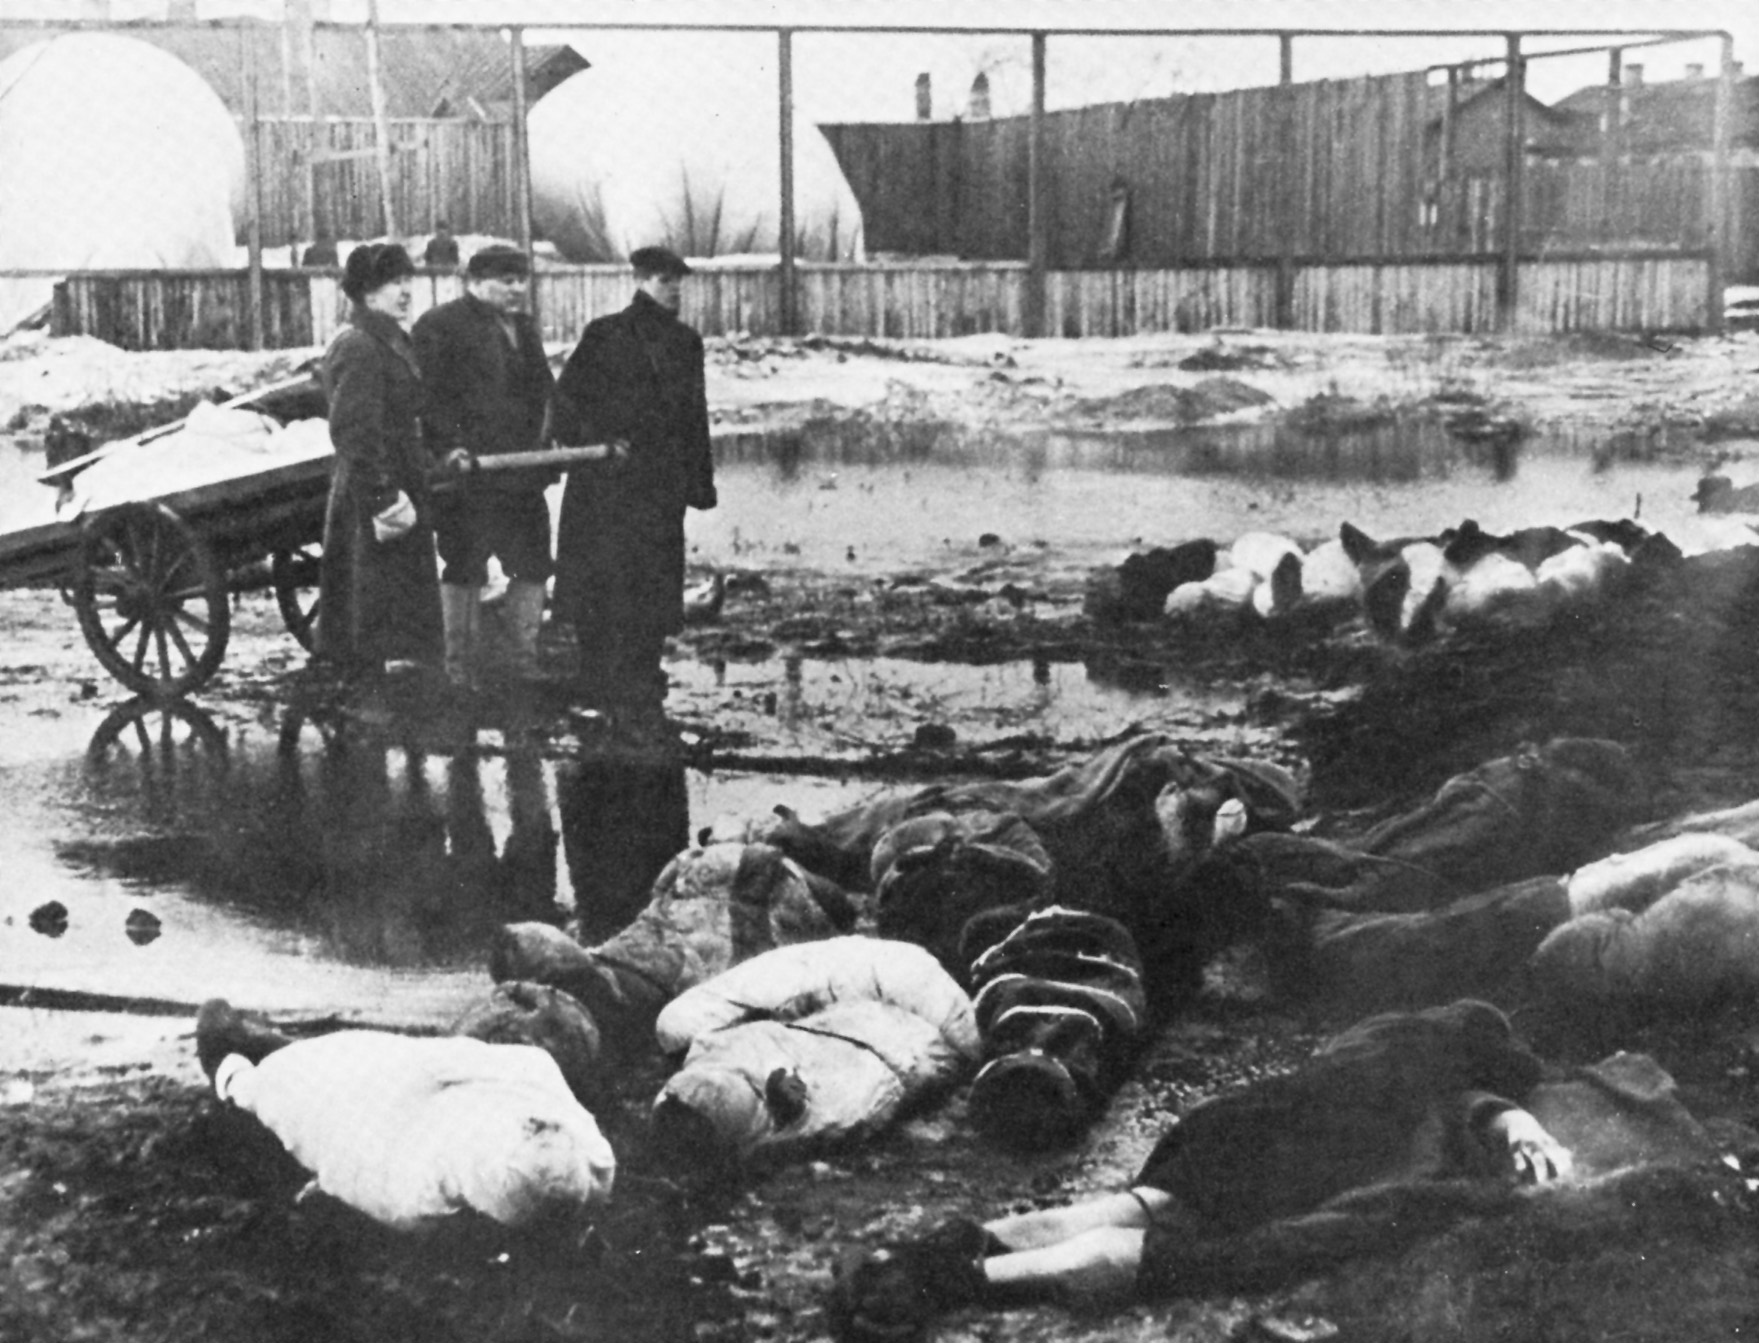 A pile of corpses awaits transport to a mass grave. Citizens were so weak from starvation, that many did not have the strength to move the dead. 